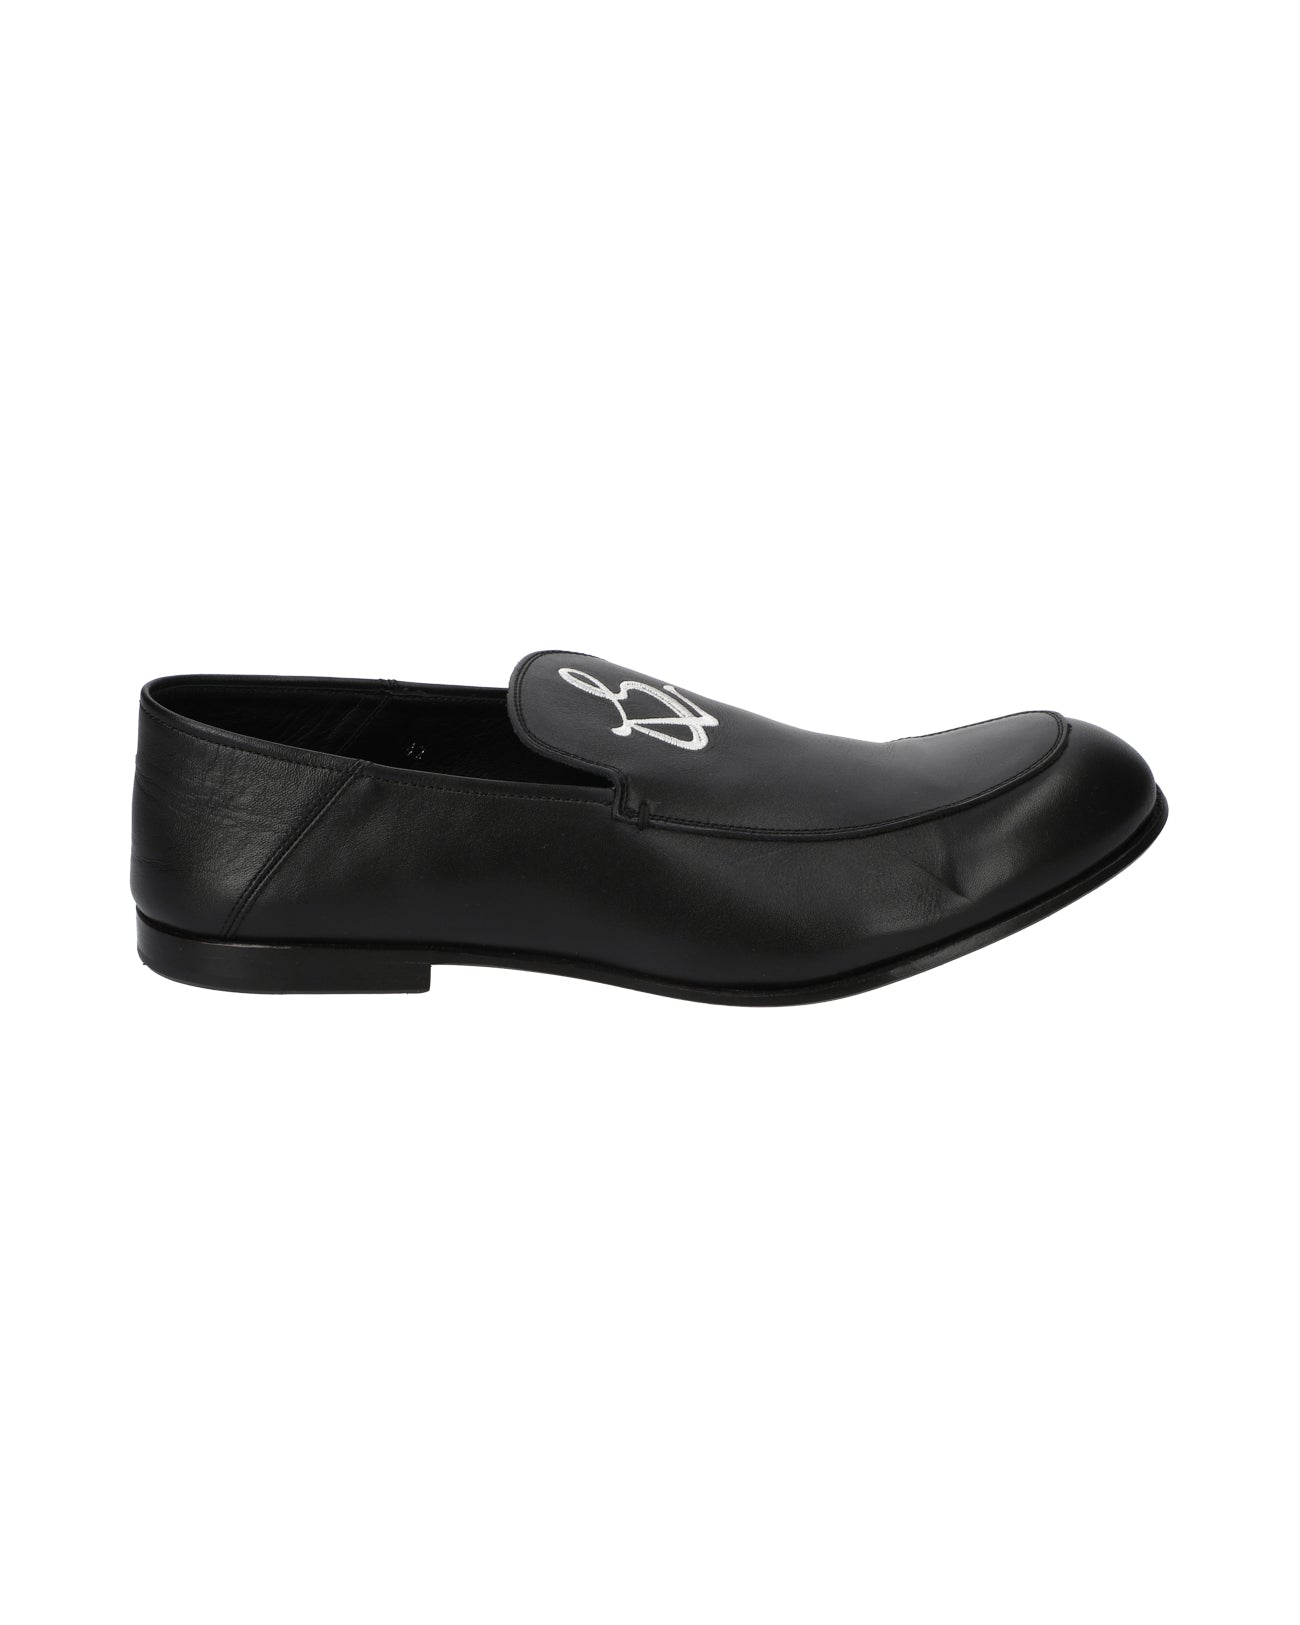 Classic loafers - black - FAB4 ONLINE STORE